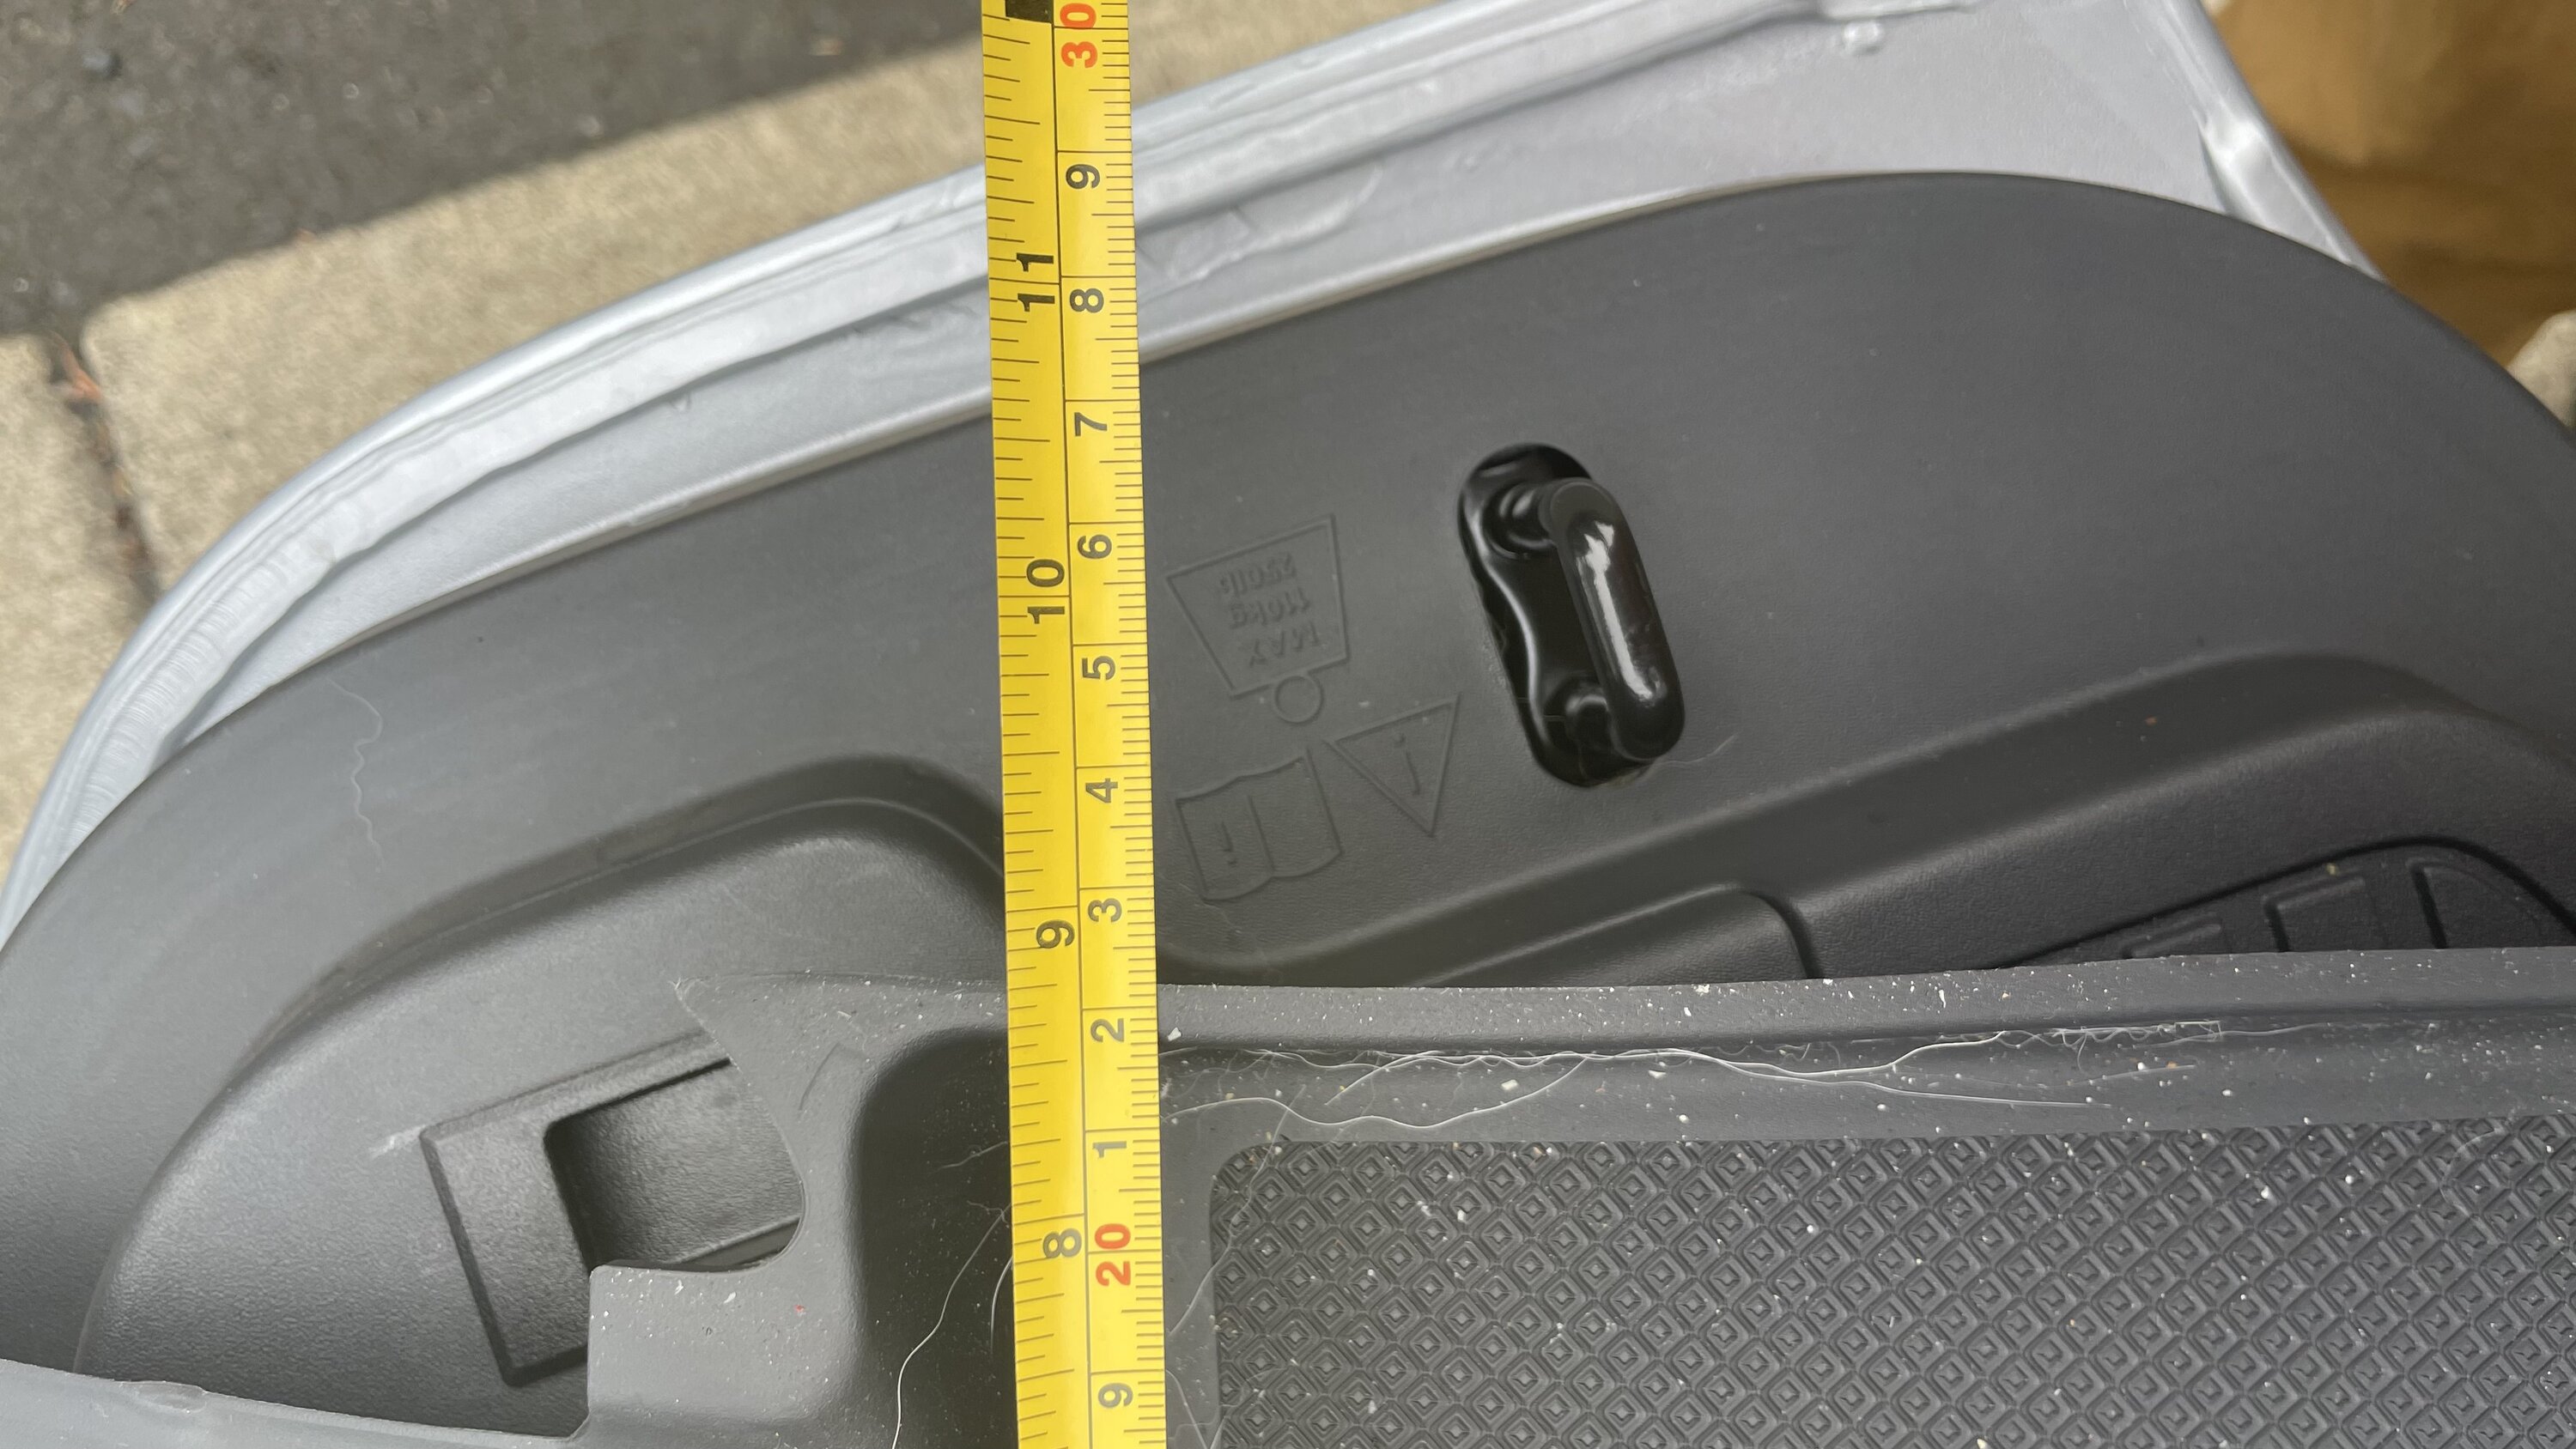 Rivian R1T R1S Dimensions of the floor tray for a cooler? 0906079E-0BE2-4B96-812A-F0D4AEF8BDF7